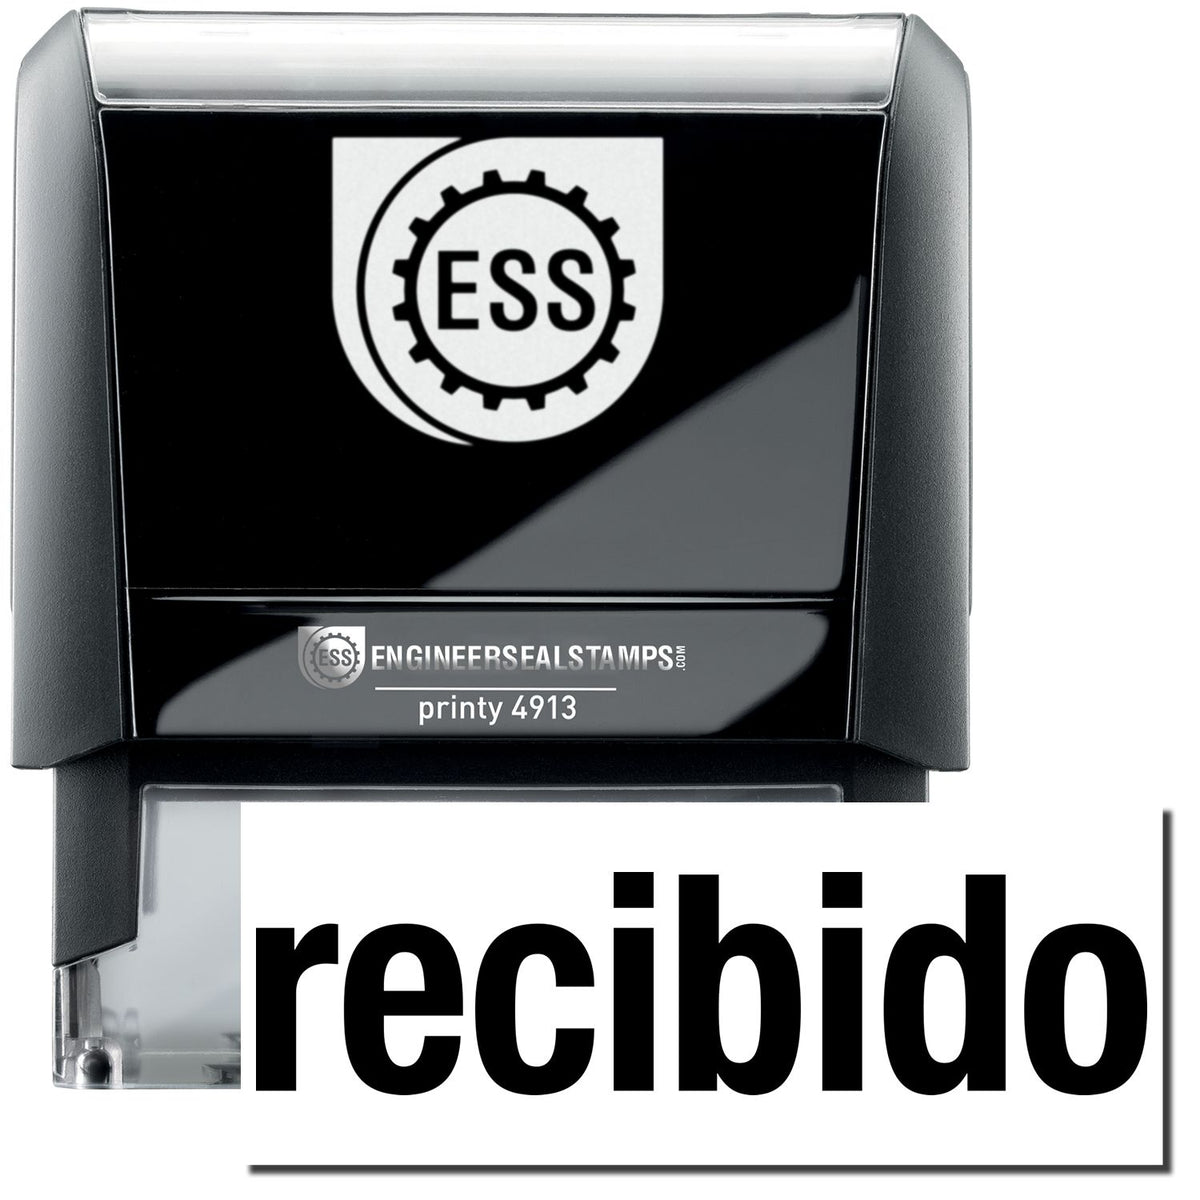 A self-inking stamp with a stamped image showing how the text &quot;recibido&quot; in a large bold font is displayed by it after stamping.